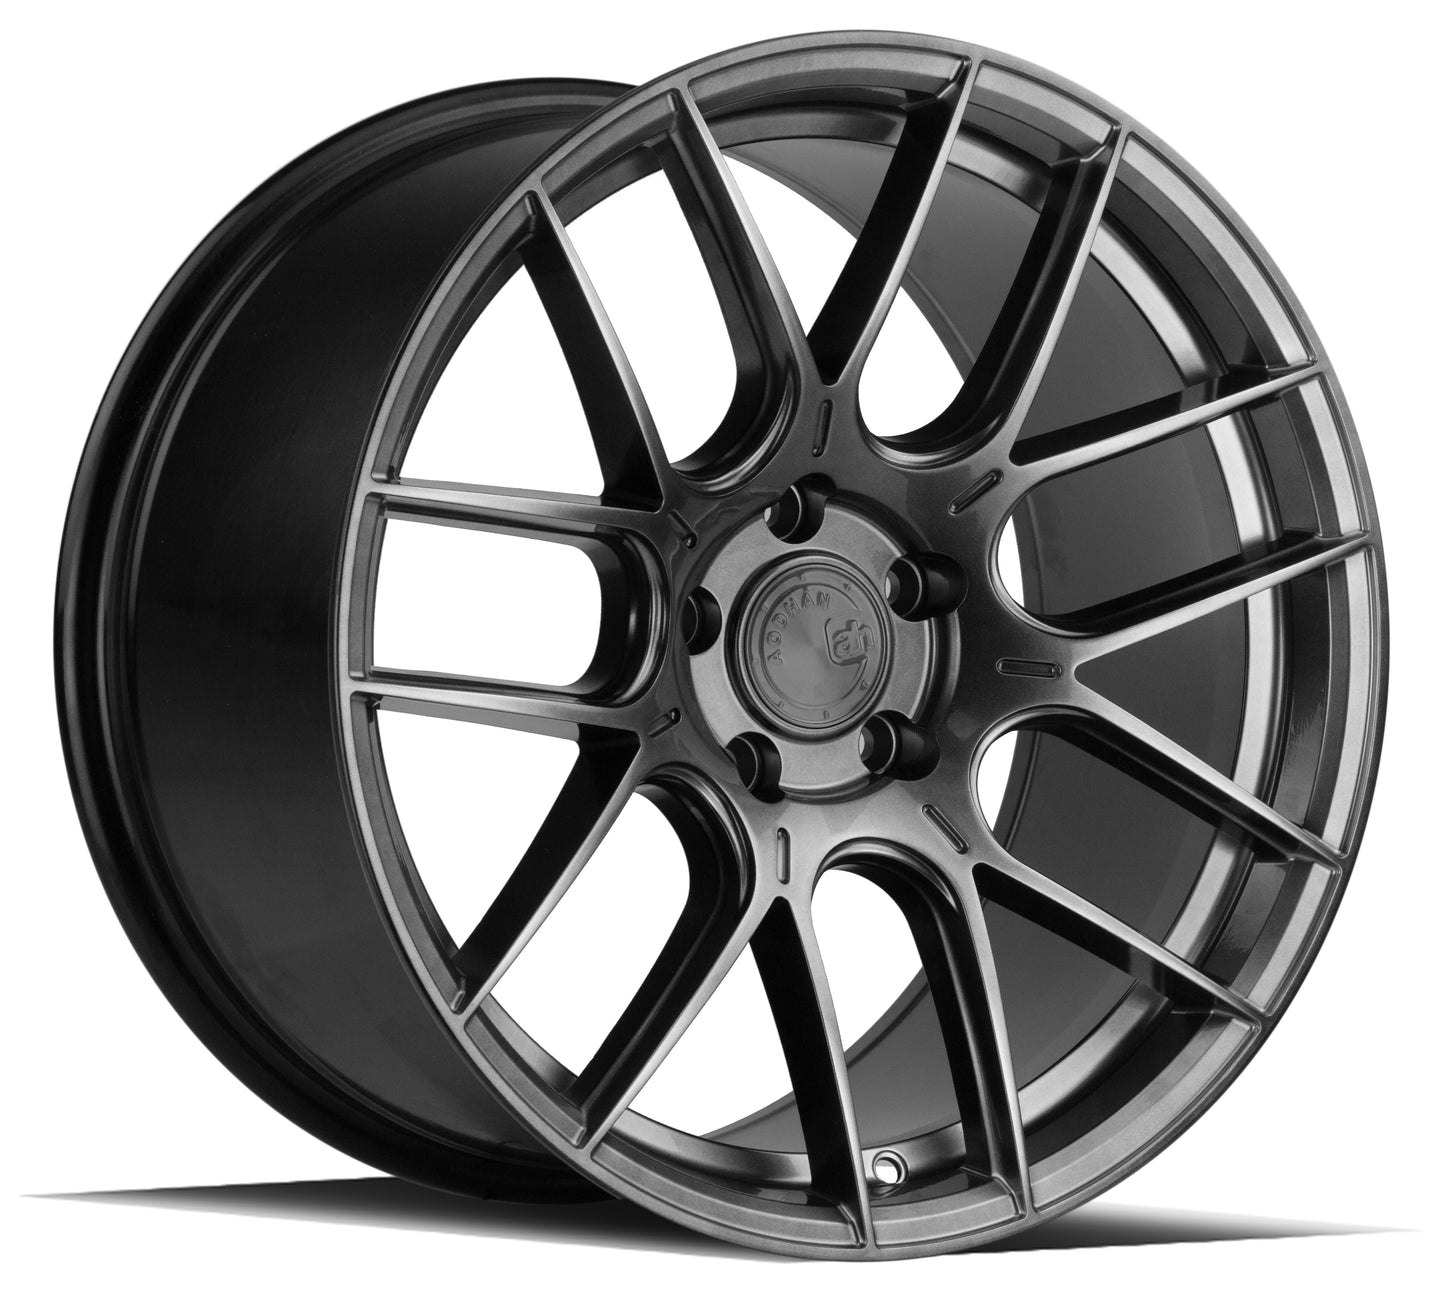 18" Aodhan AHX Hyper Black 5x112 ( Staggered Setup ) ( Set of 4 )